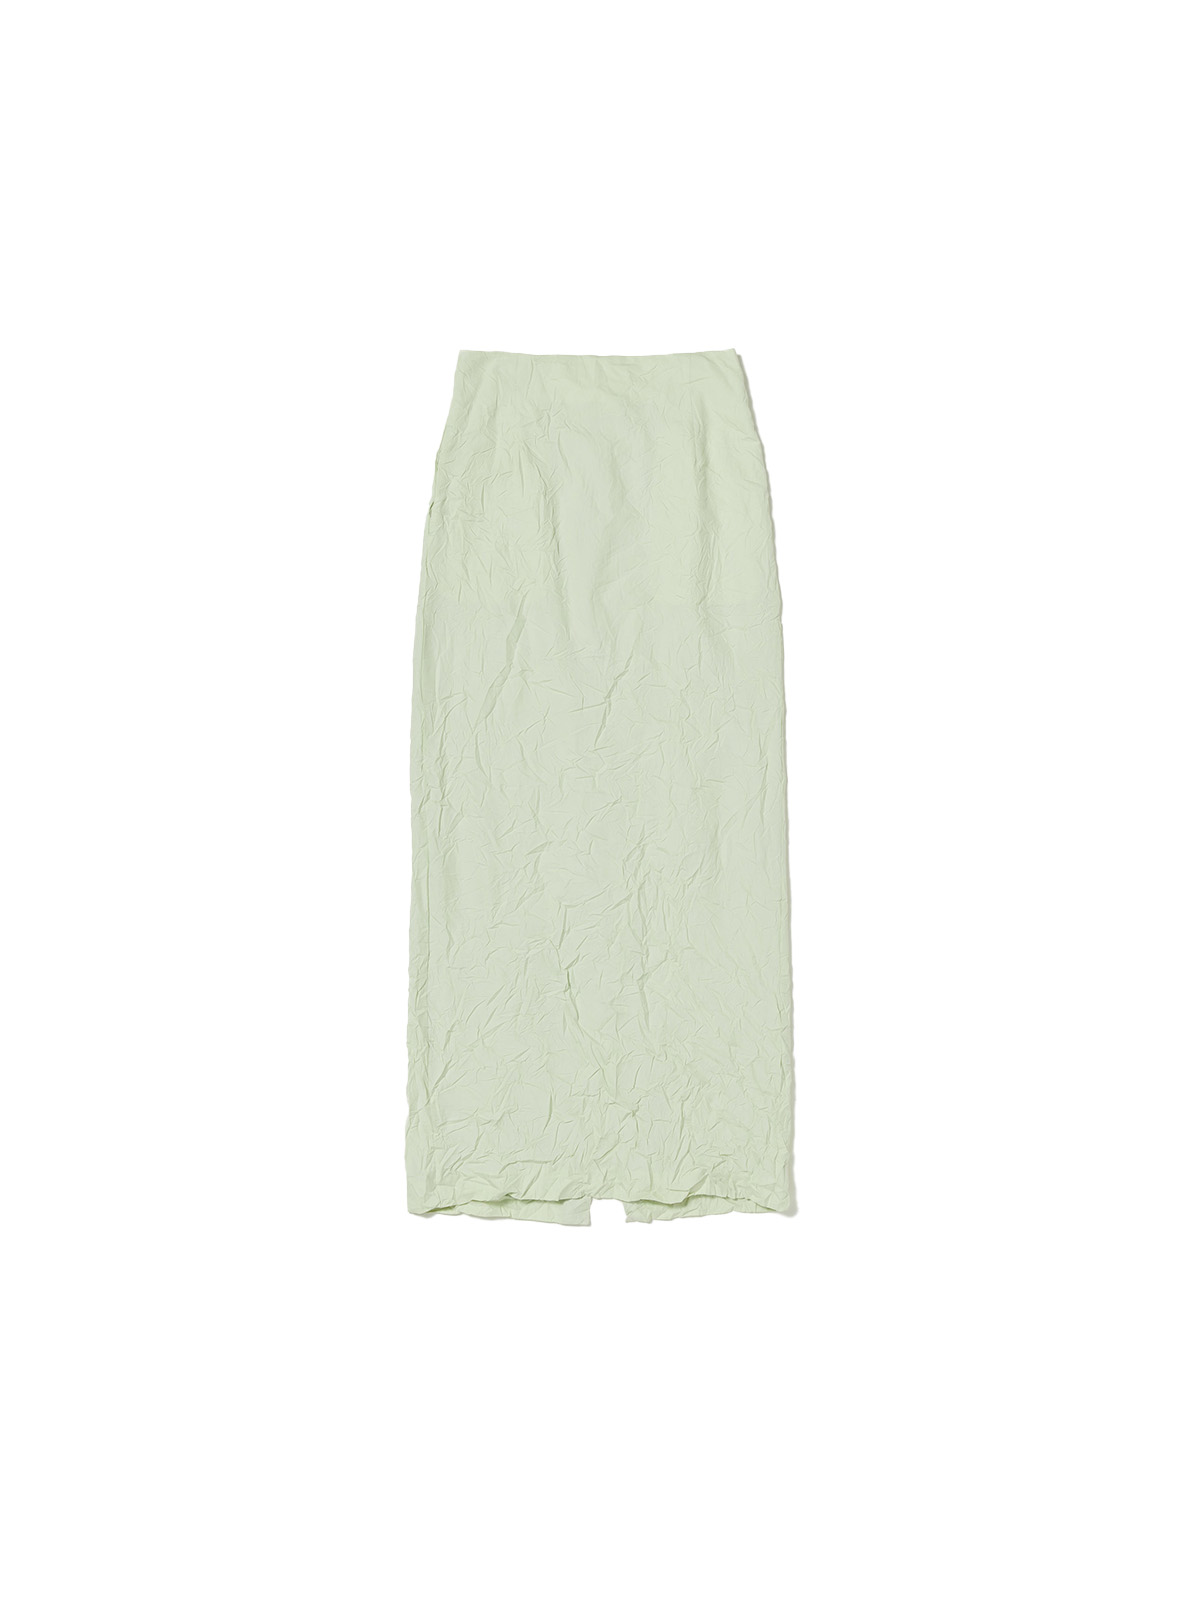 WRINKLED WASHED FINX TWILL SKIRT (LIGHT GREEN)